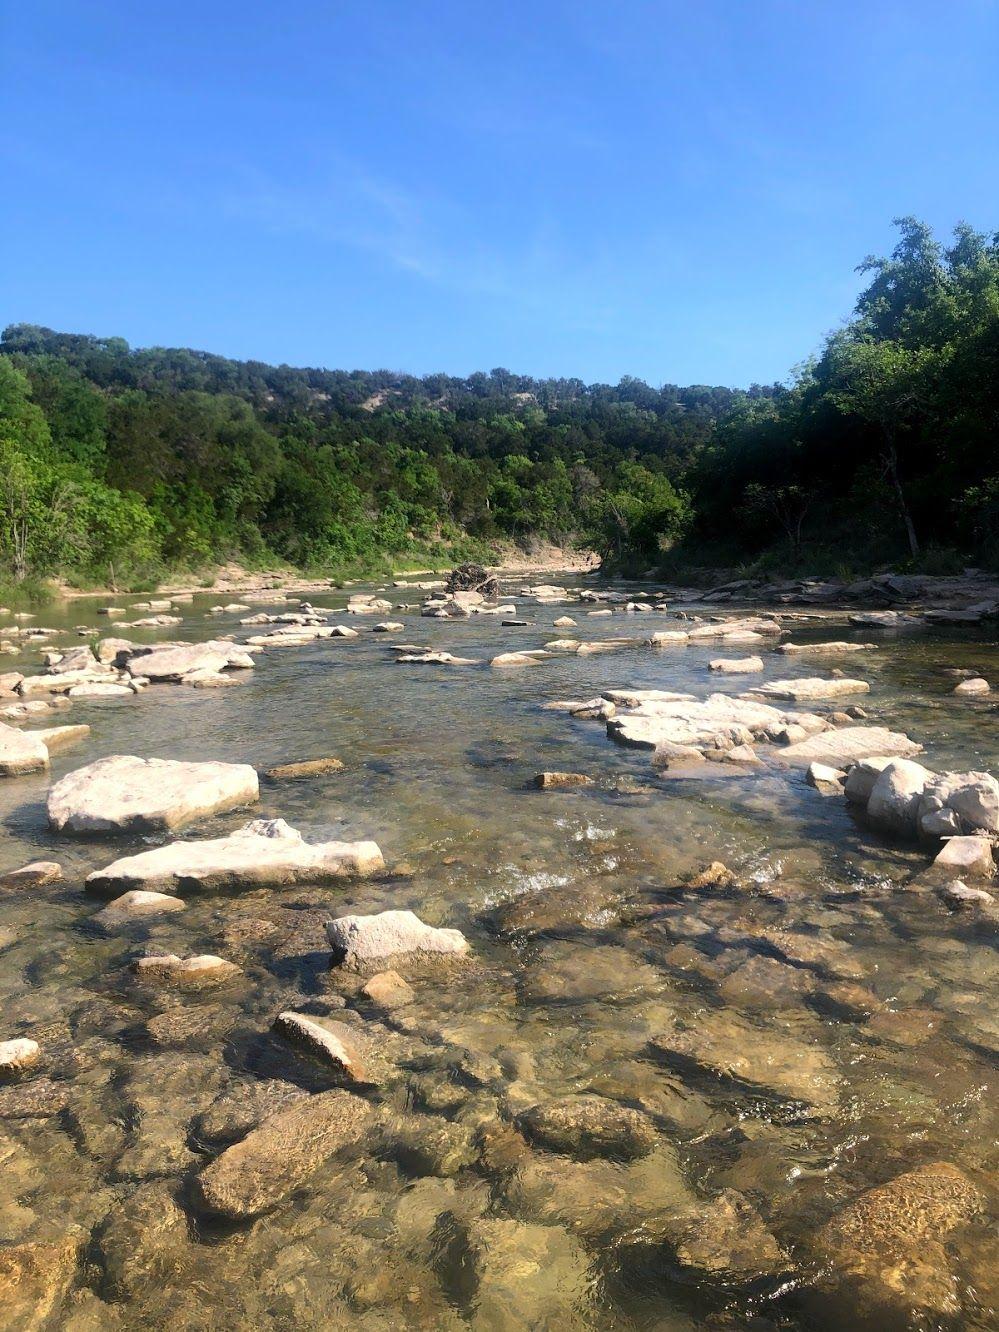 A view of the Paluxy River with several rocks in the water.